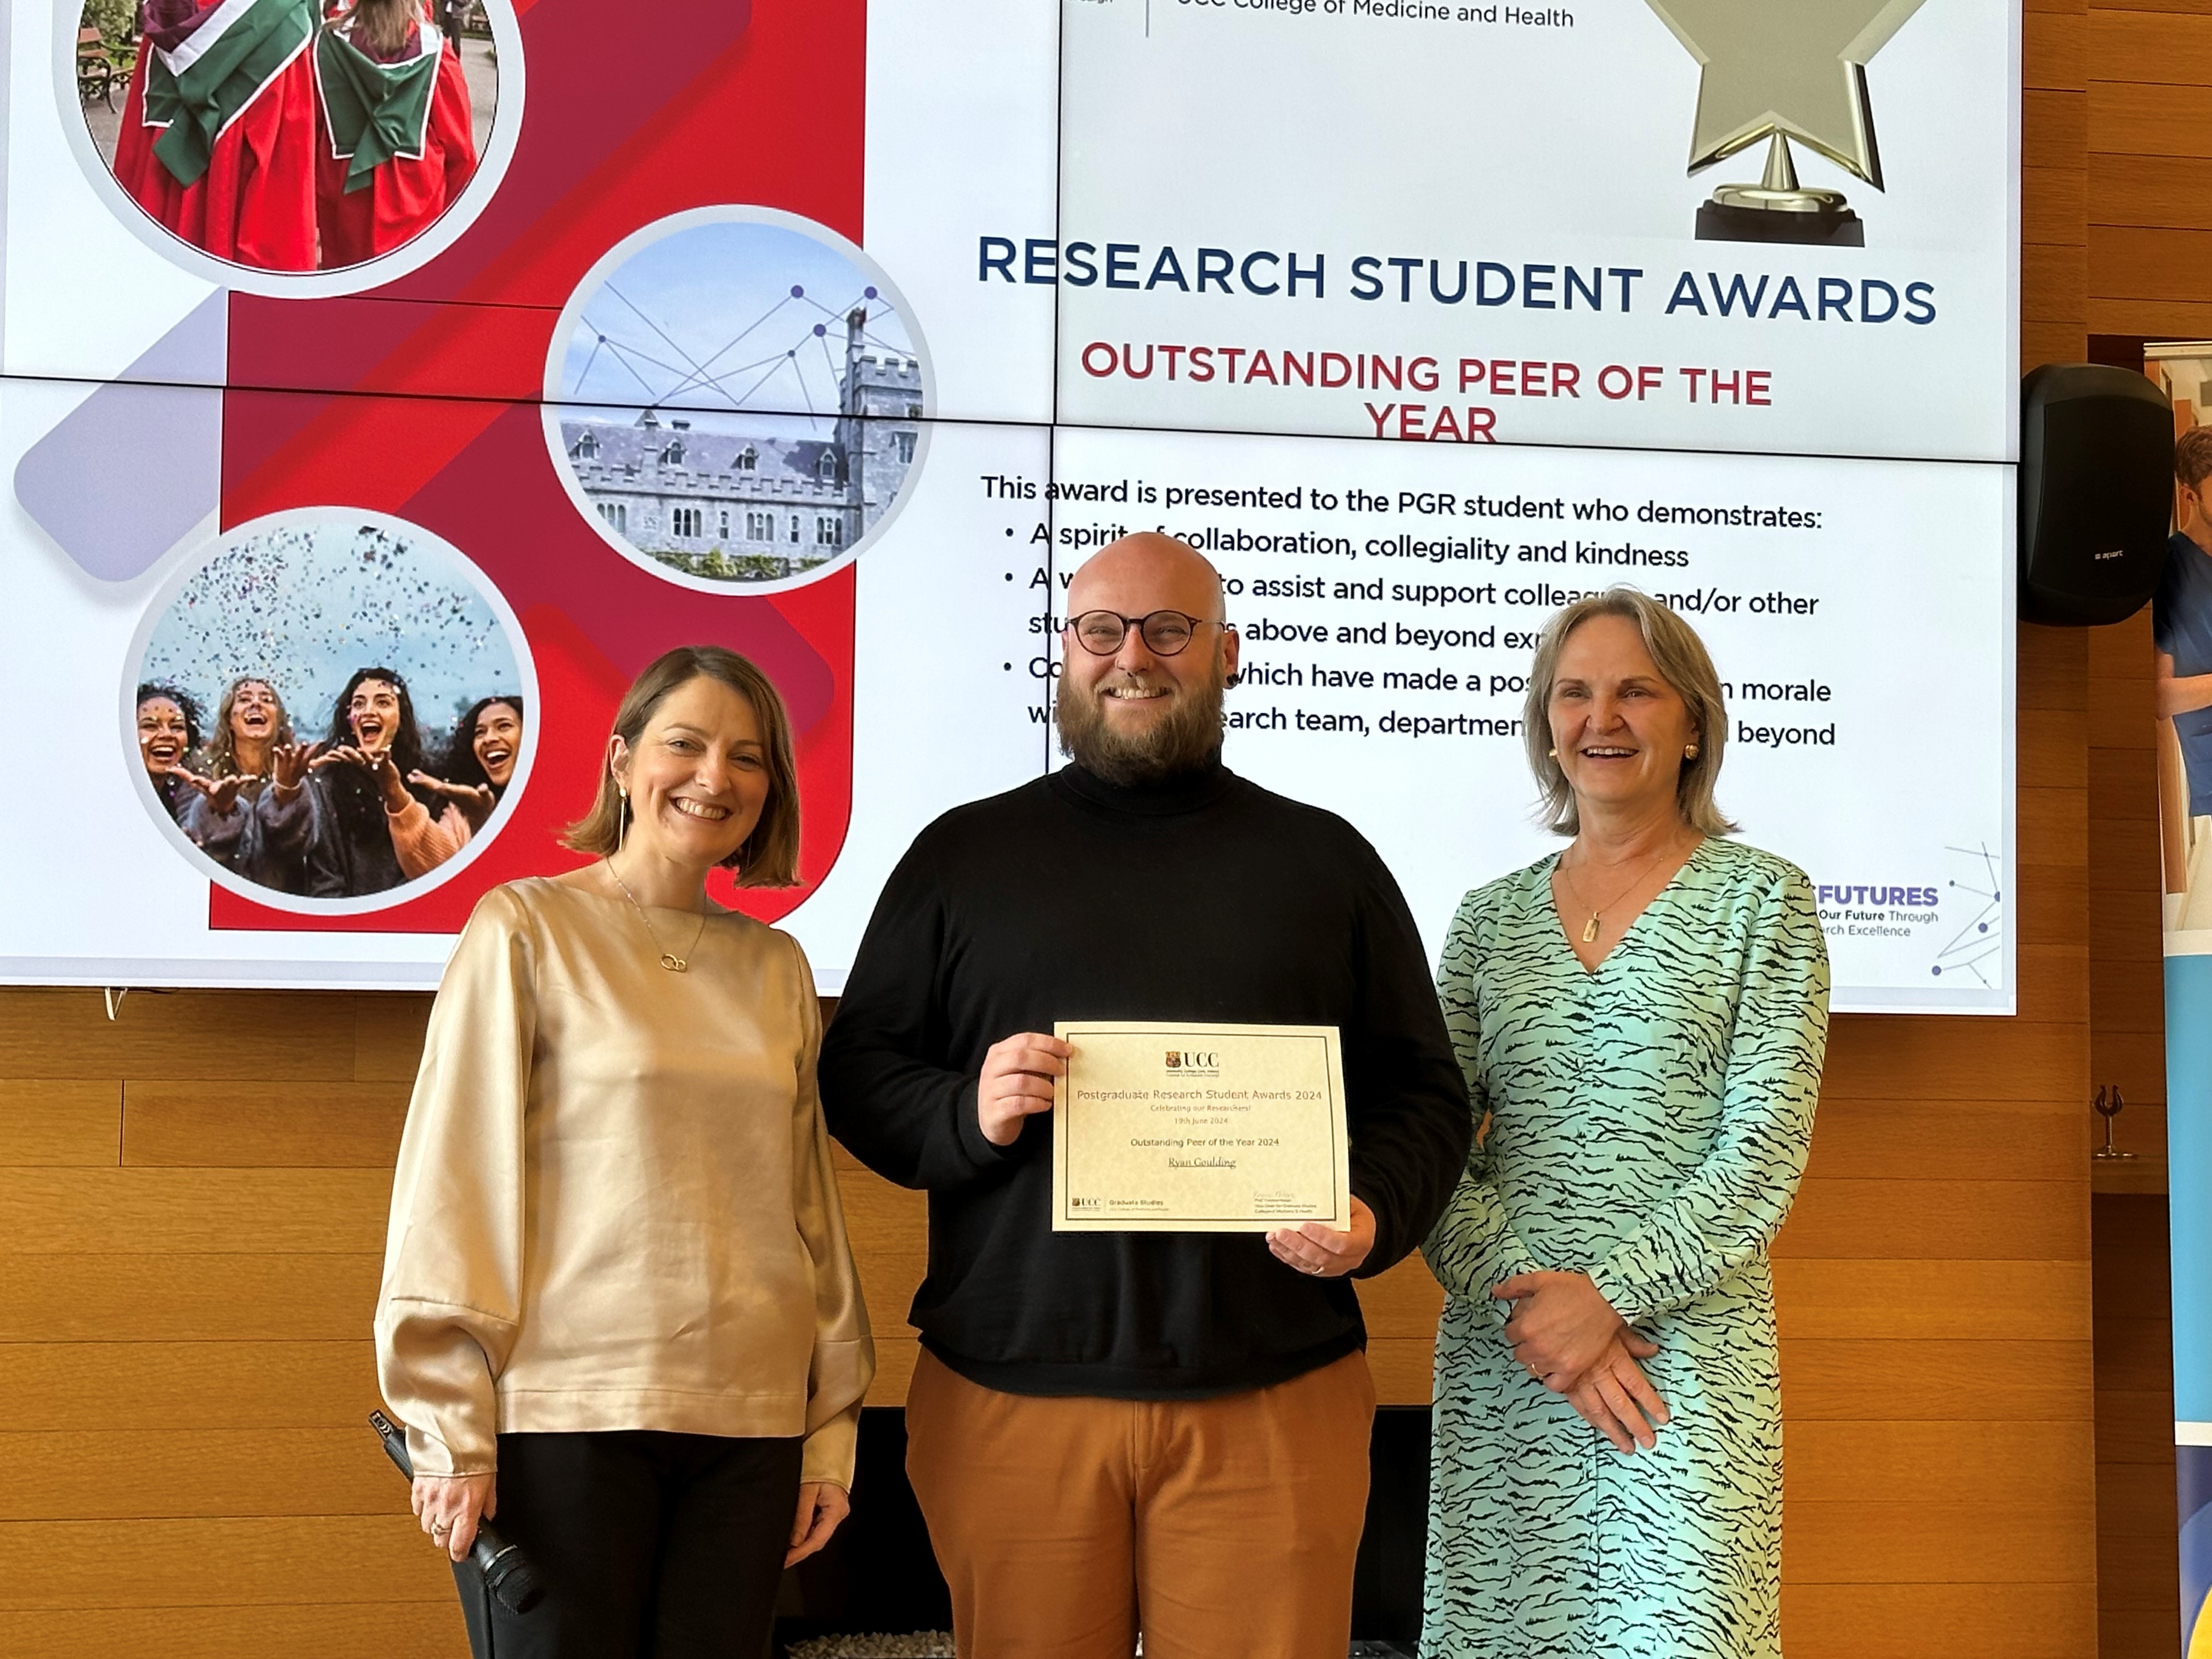 Mx Ryan Goulding, recipient of award for Outstanding Peer of the Year, pictured with Professor Yvonne Nolan, Vice Head of Graduate Studies, CoMH and Professor Helen Whelton, Head of CoMH.